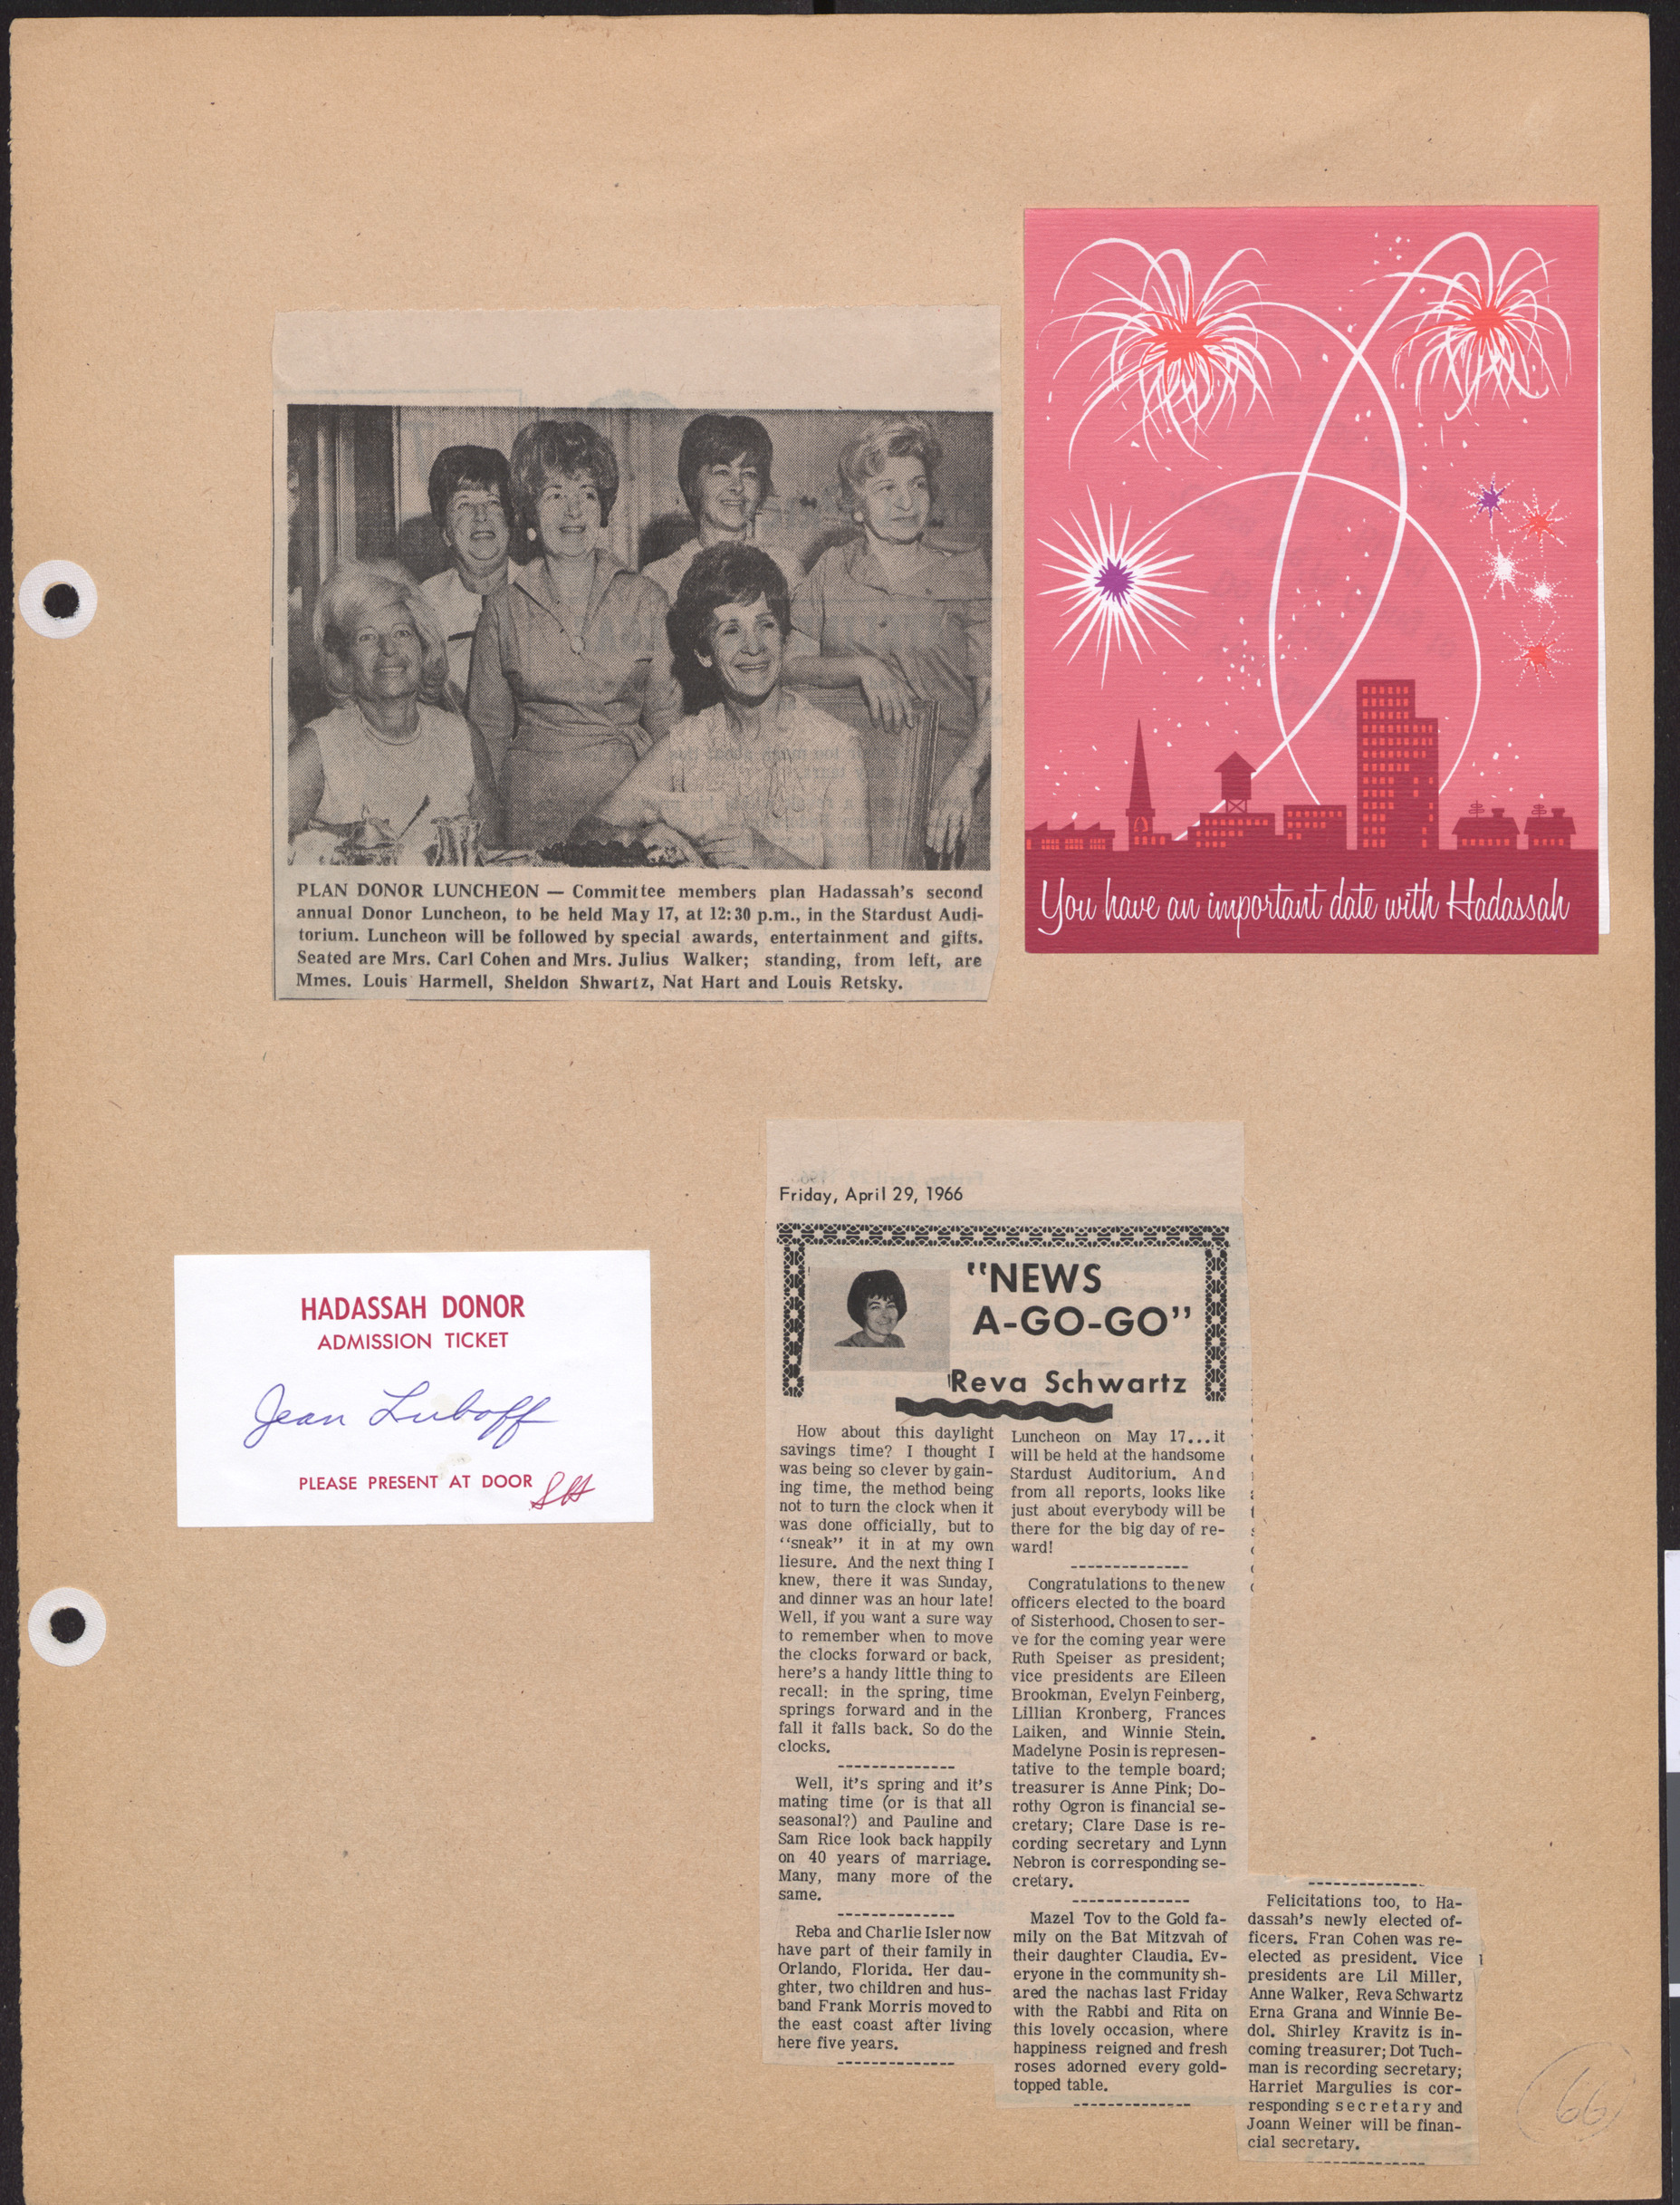 Newspaper clippings about Hadassah events and invitation to luncheon, April 1966